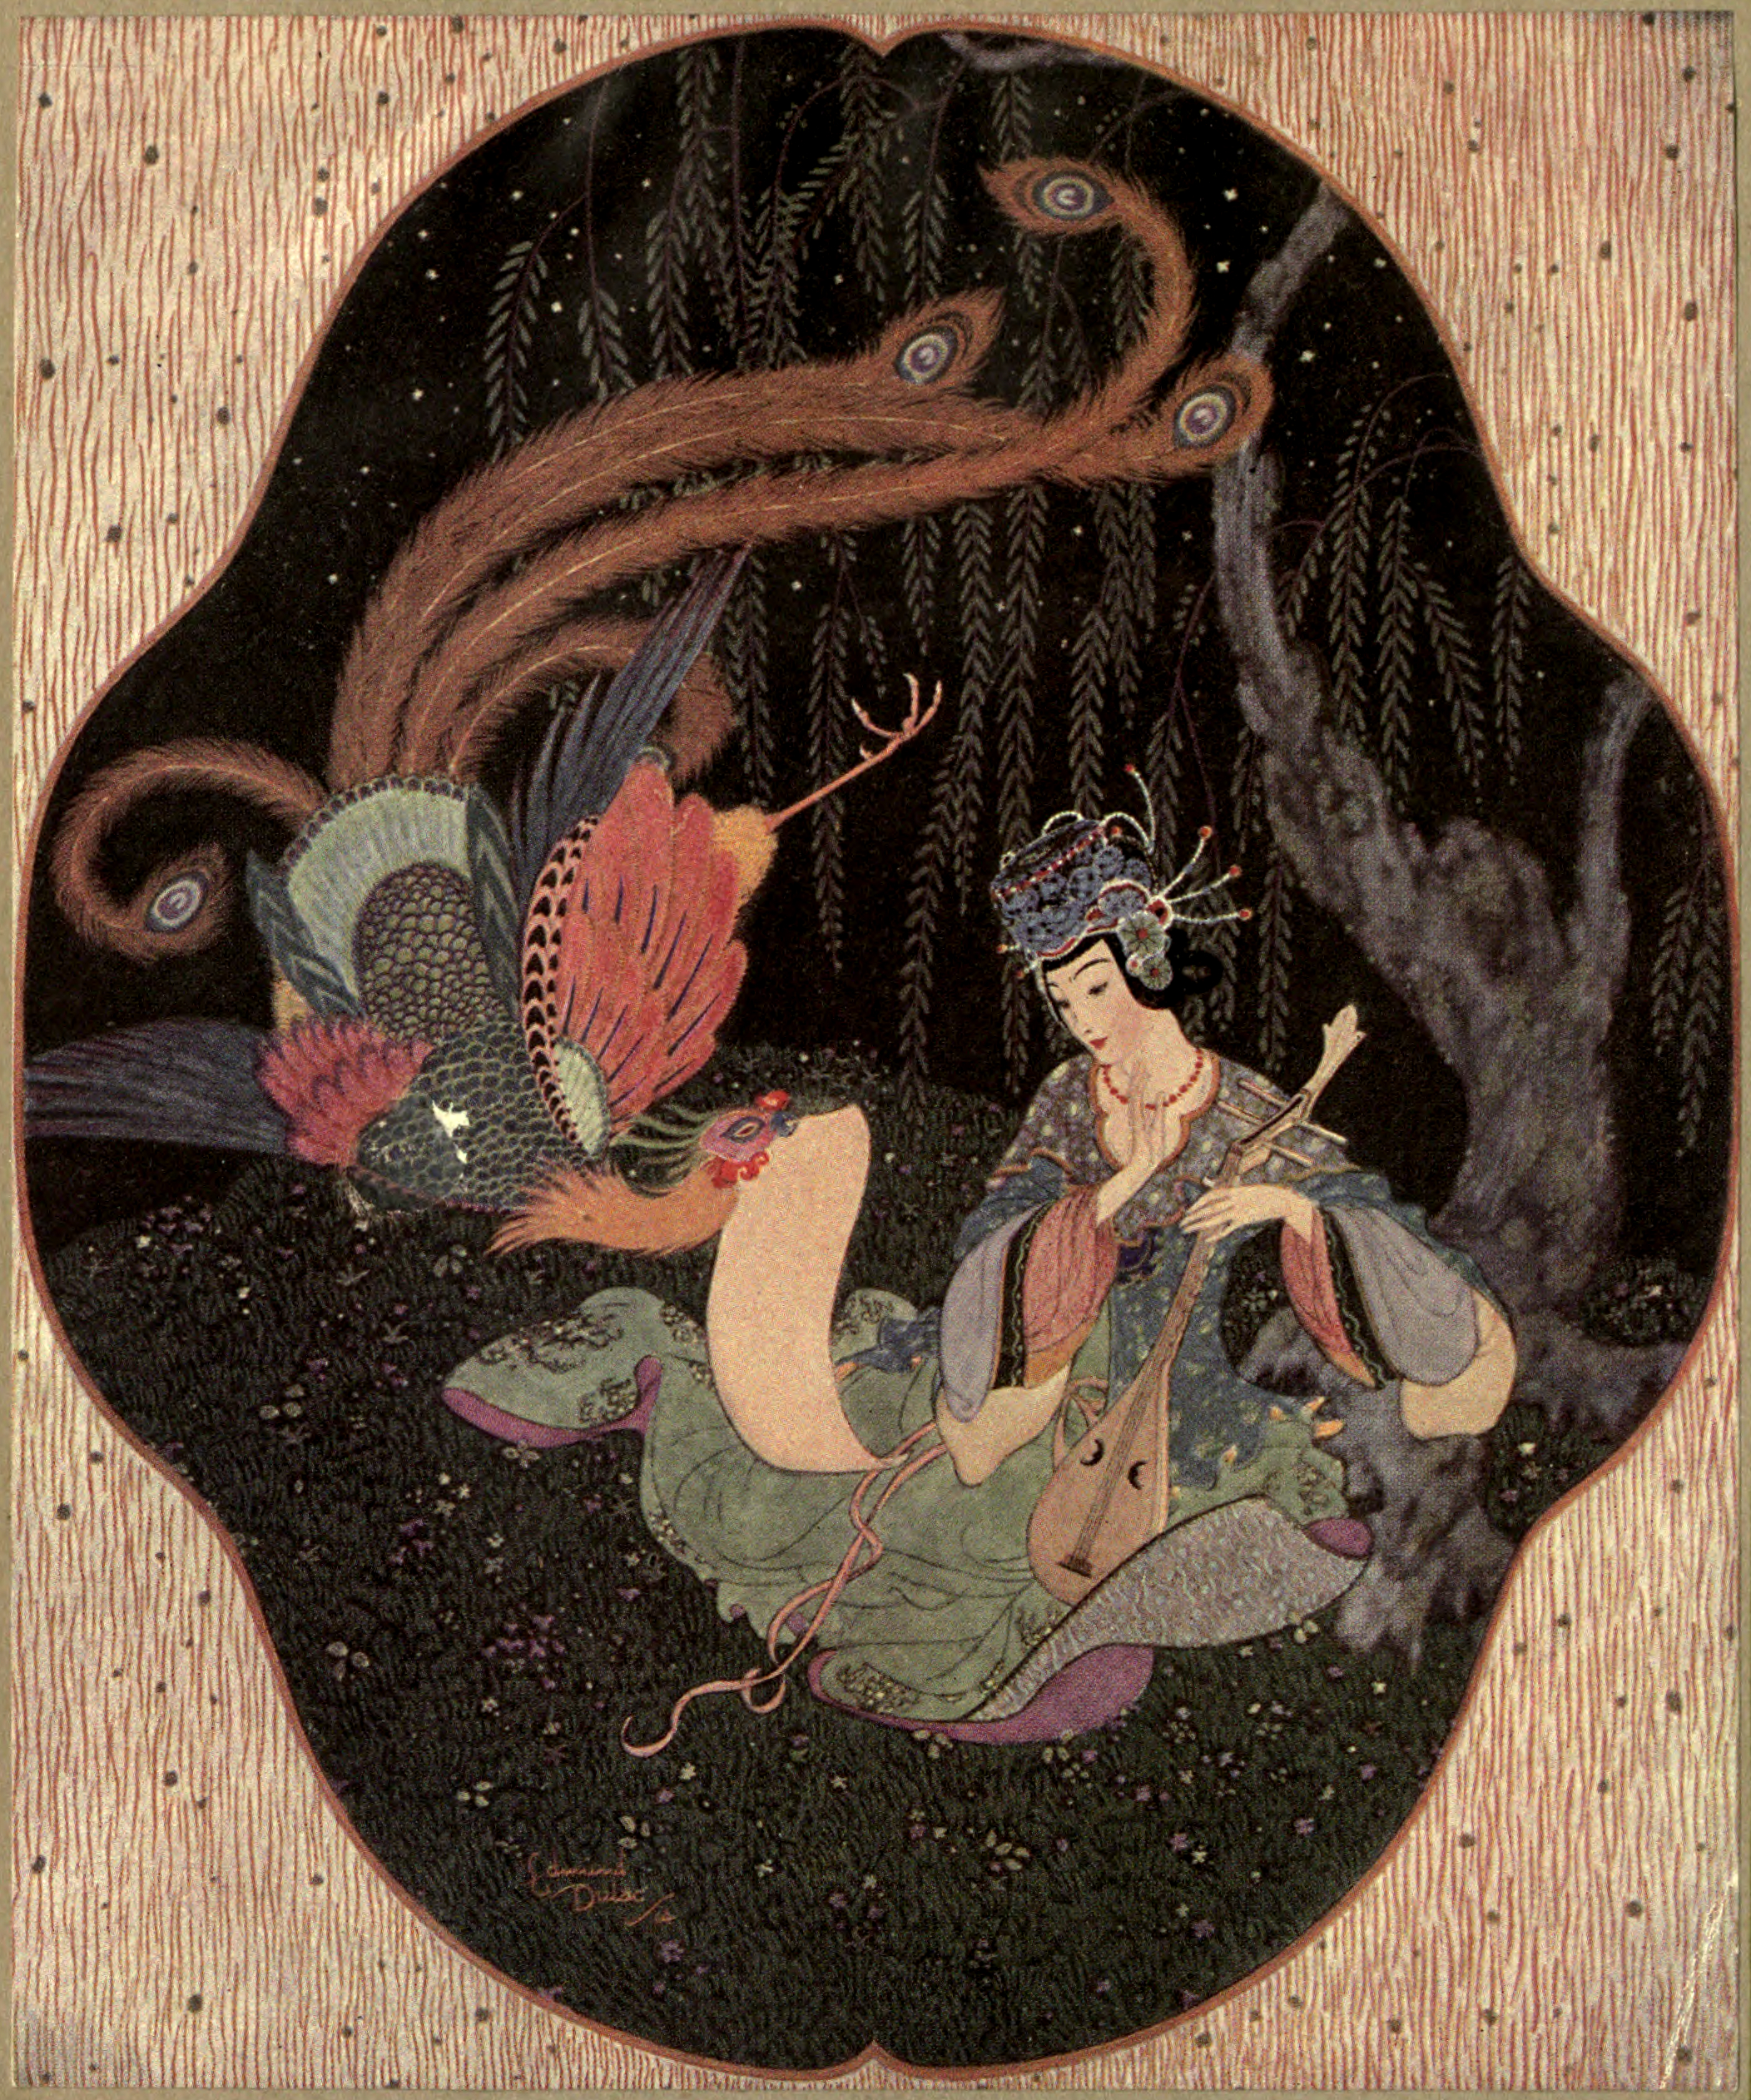 A woman sits on the ground of a dark forest with a string instrument while a firebird swoops down to her holding a paper.